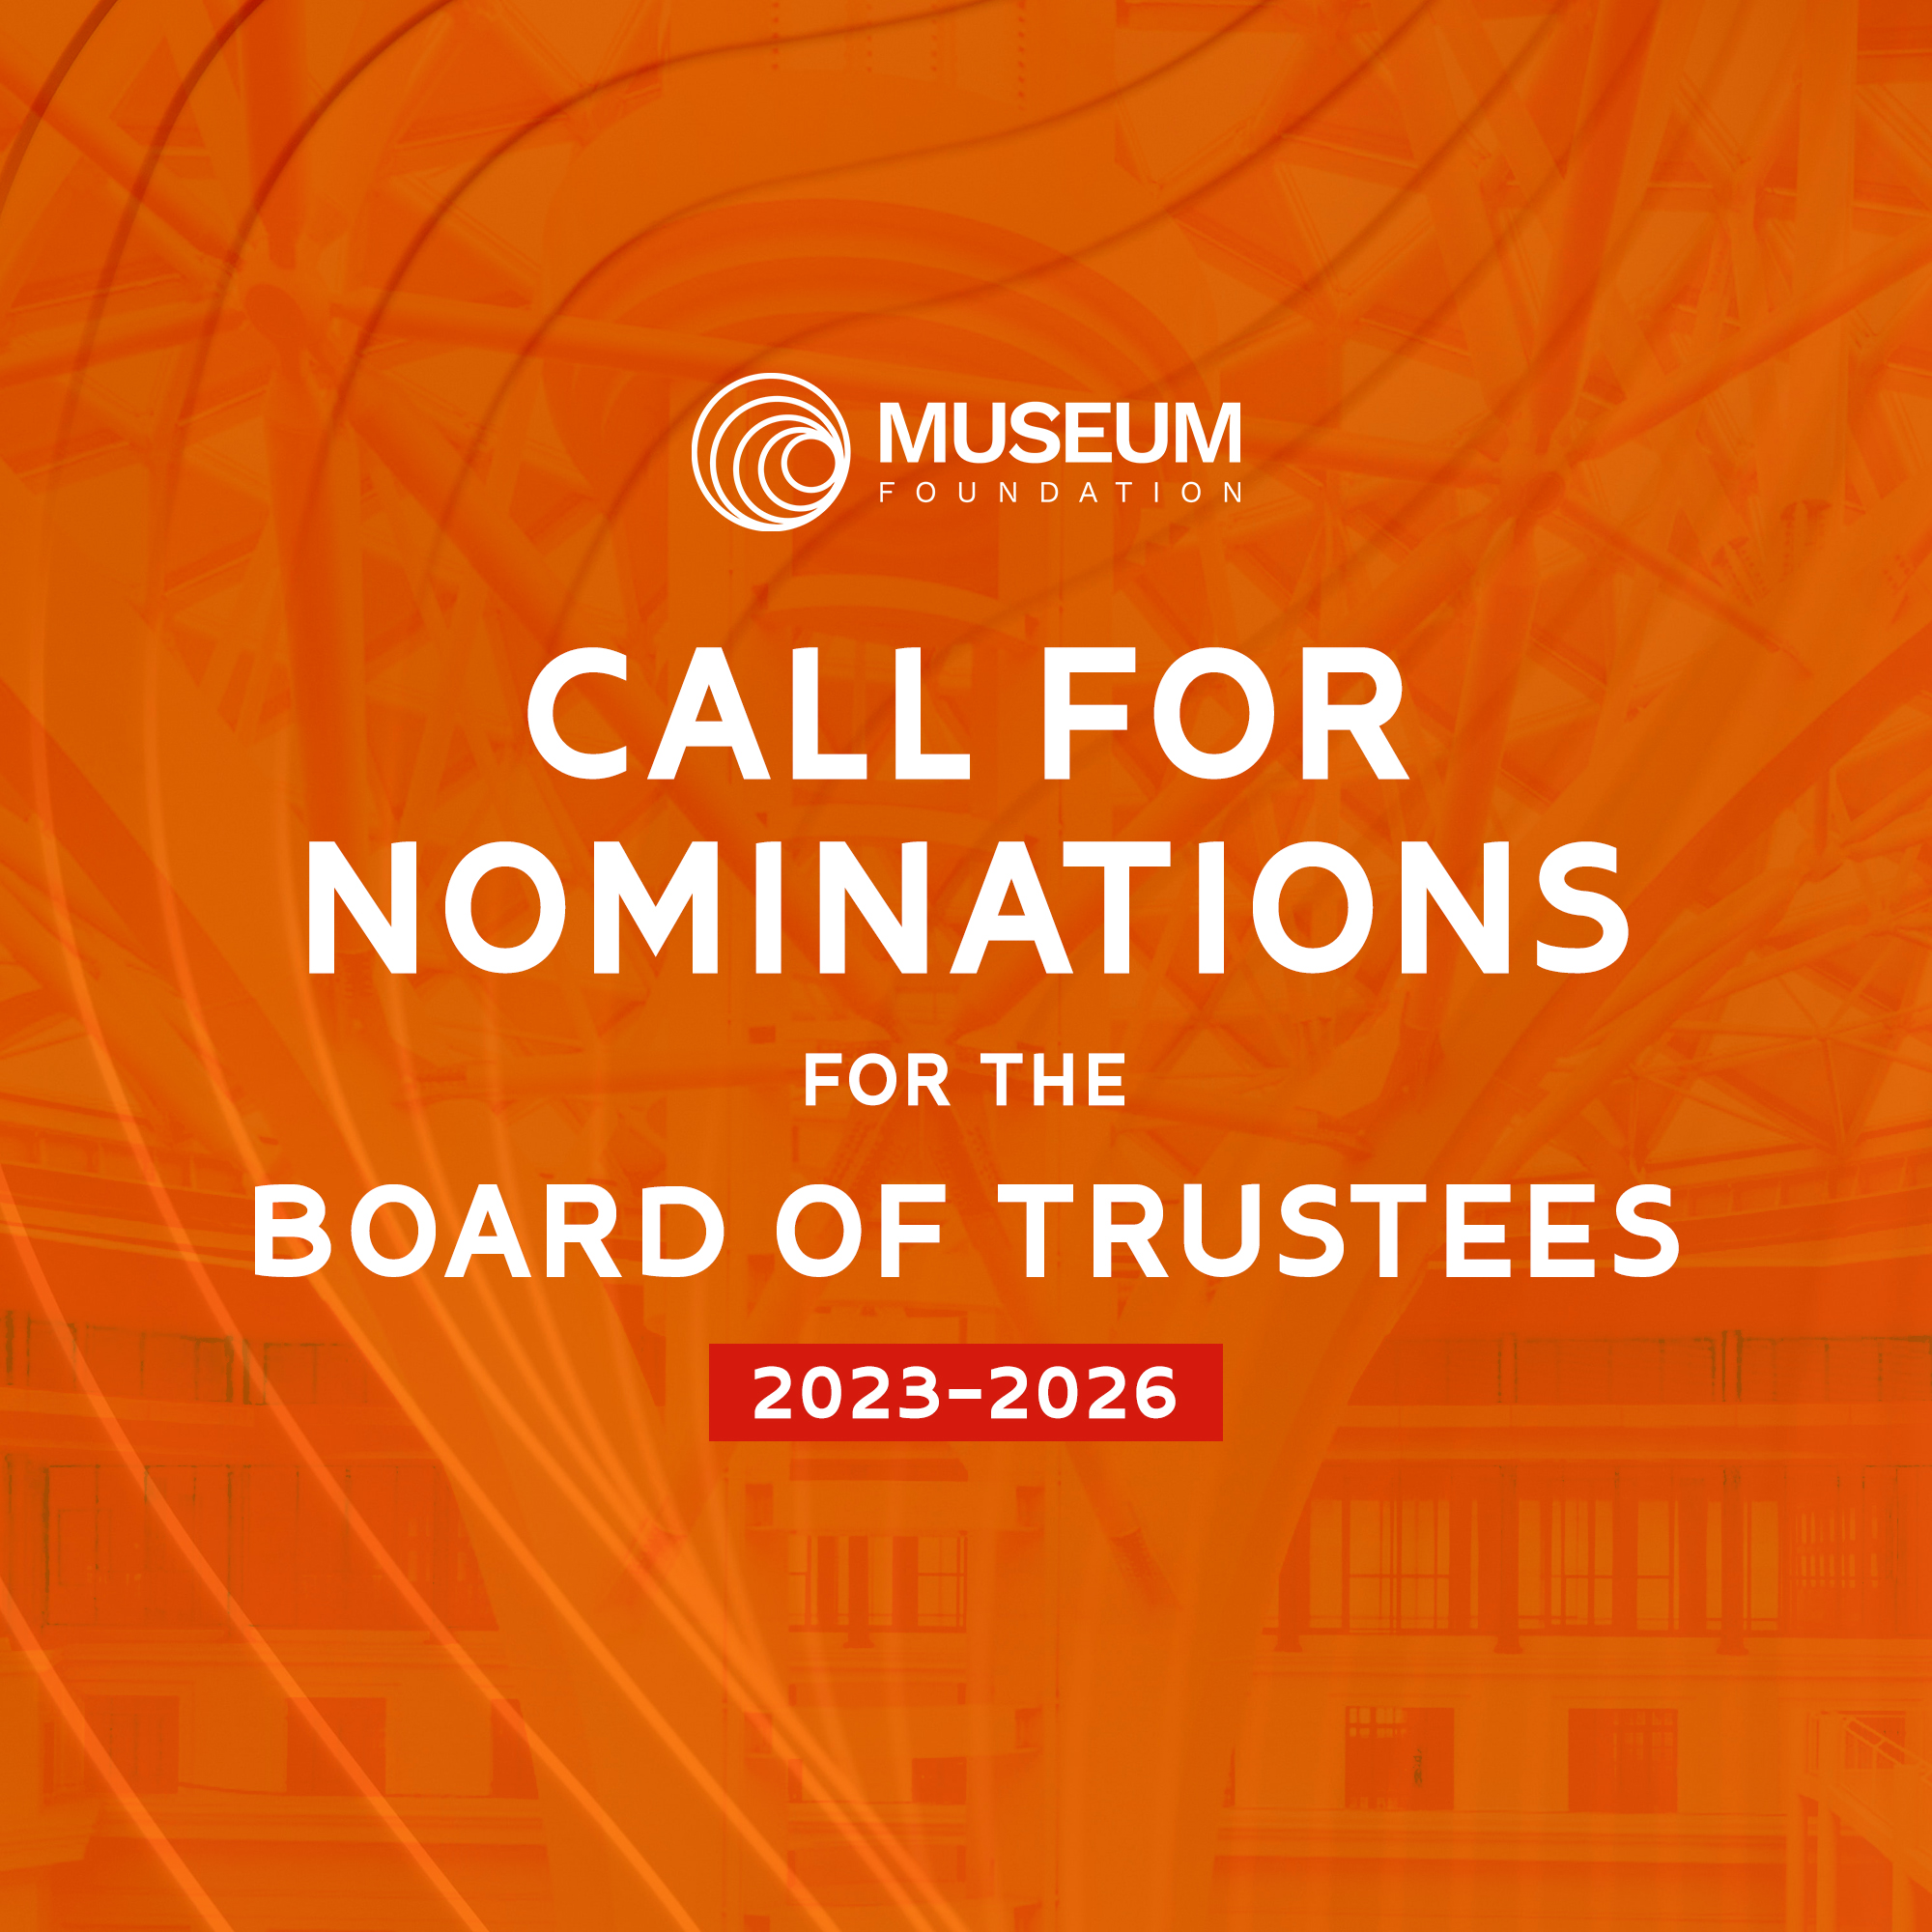 Call for Nominations for Board of Trustees 2023-2026